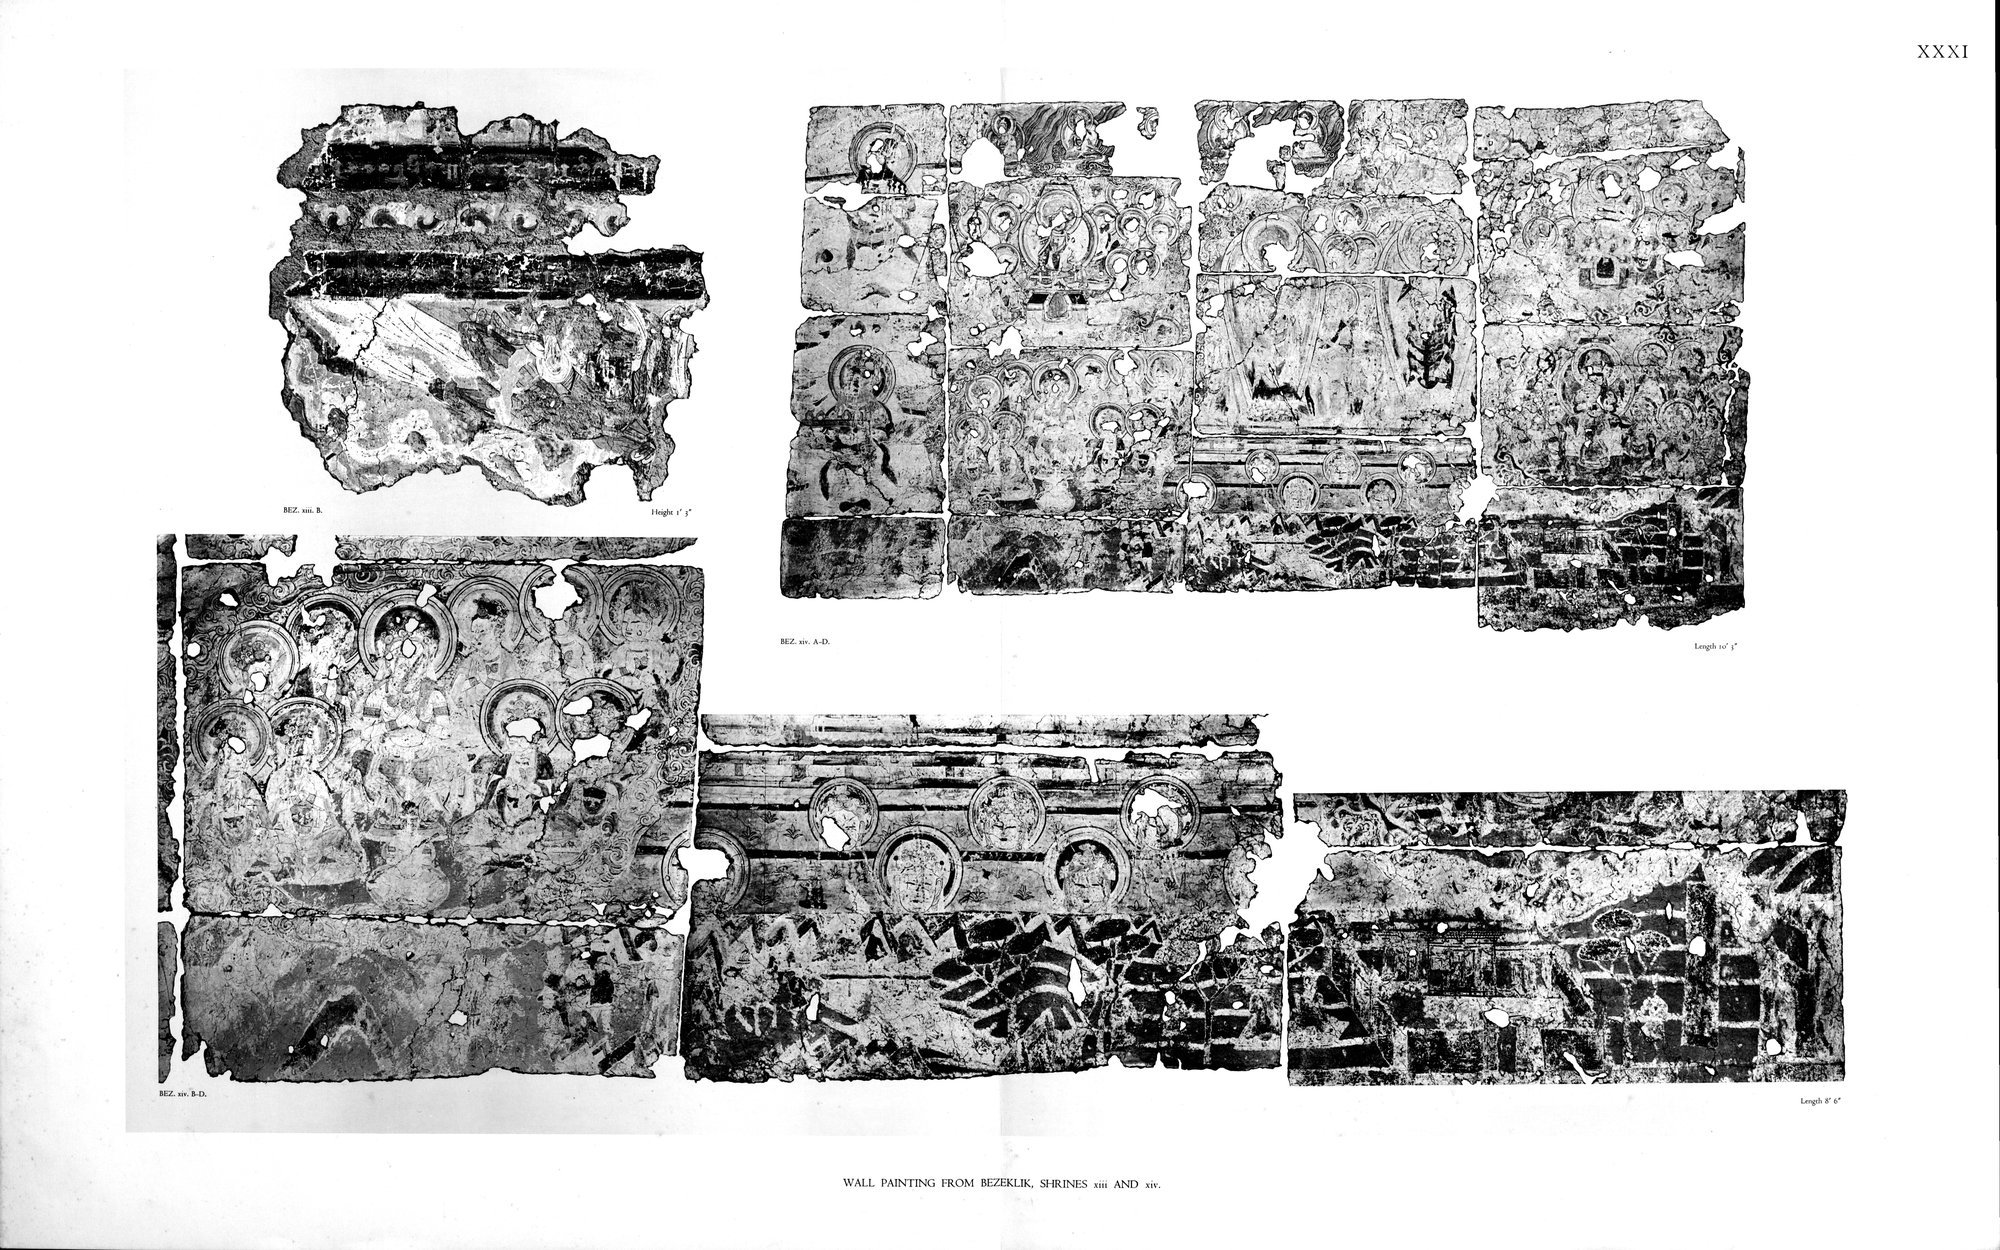 Wall Paintings from Ancient Shrines in Central Asia : vol.2 / Page 34 (Grayscale High Resolution Image)